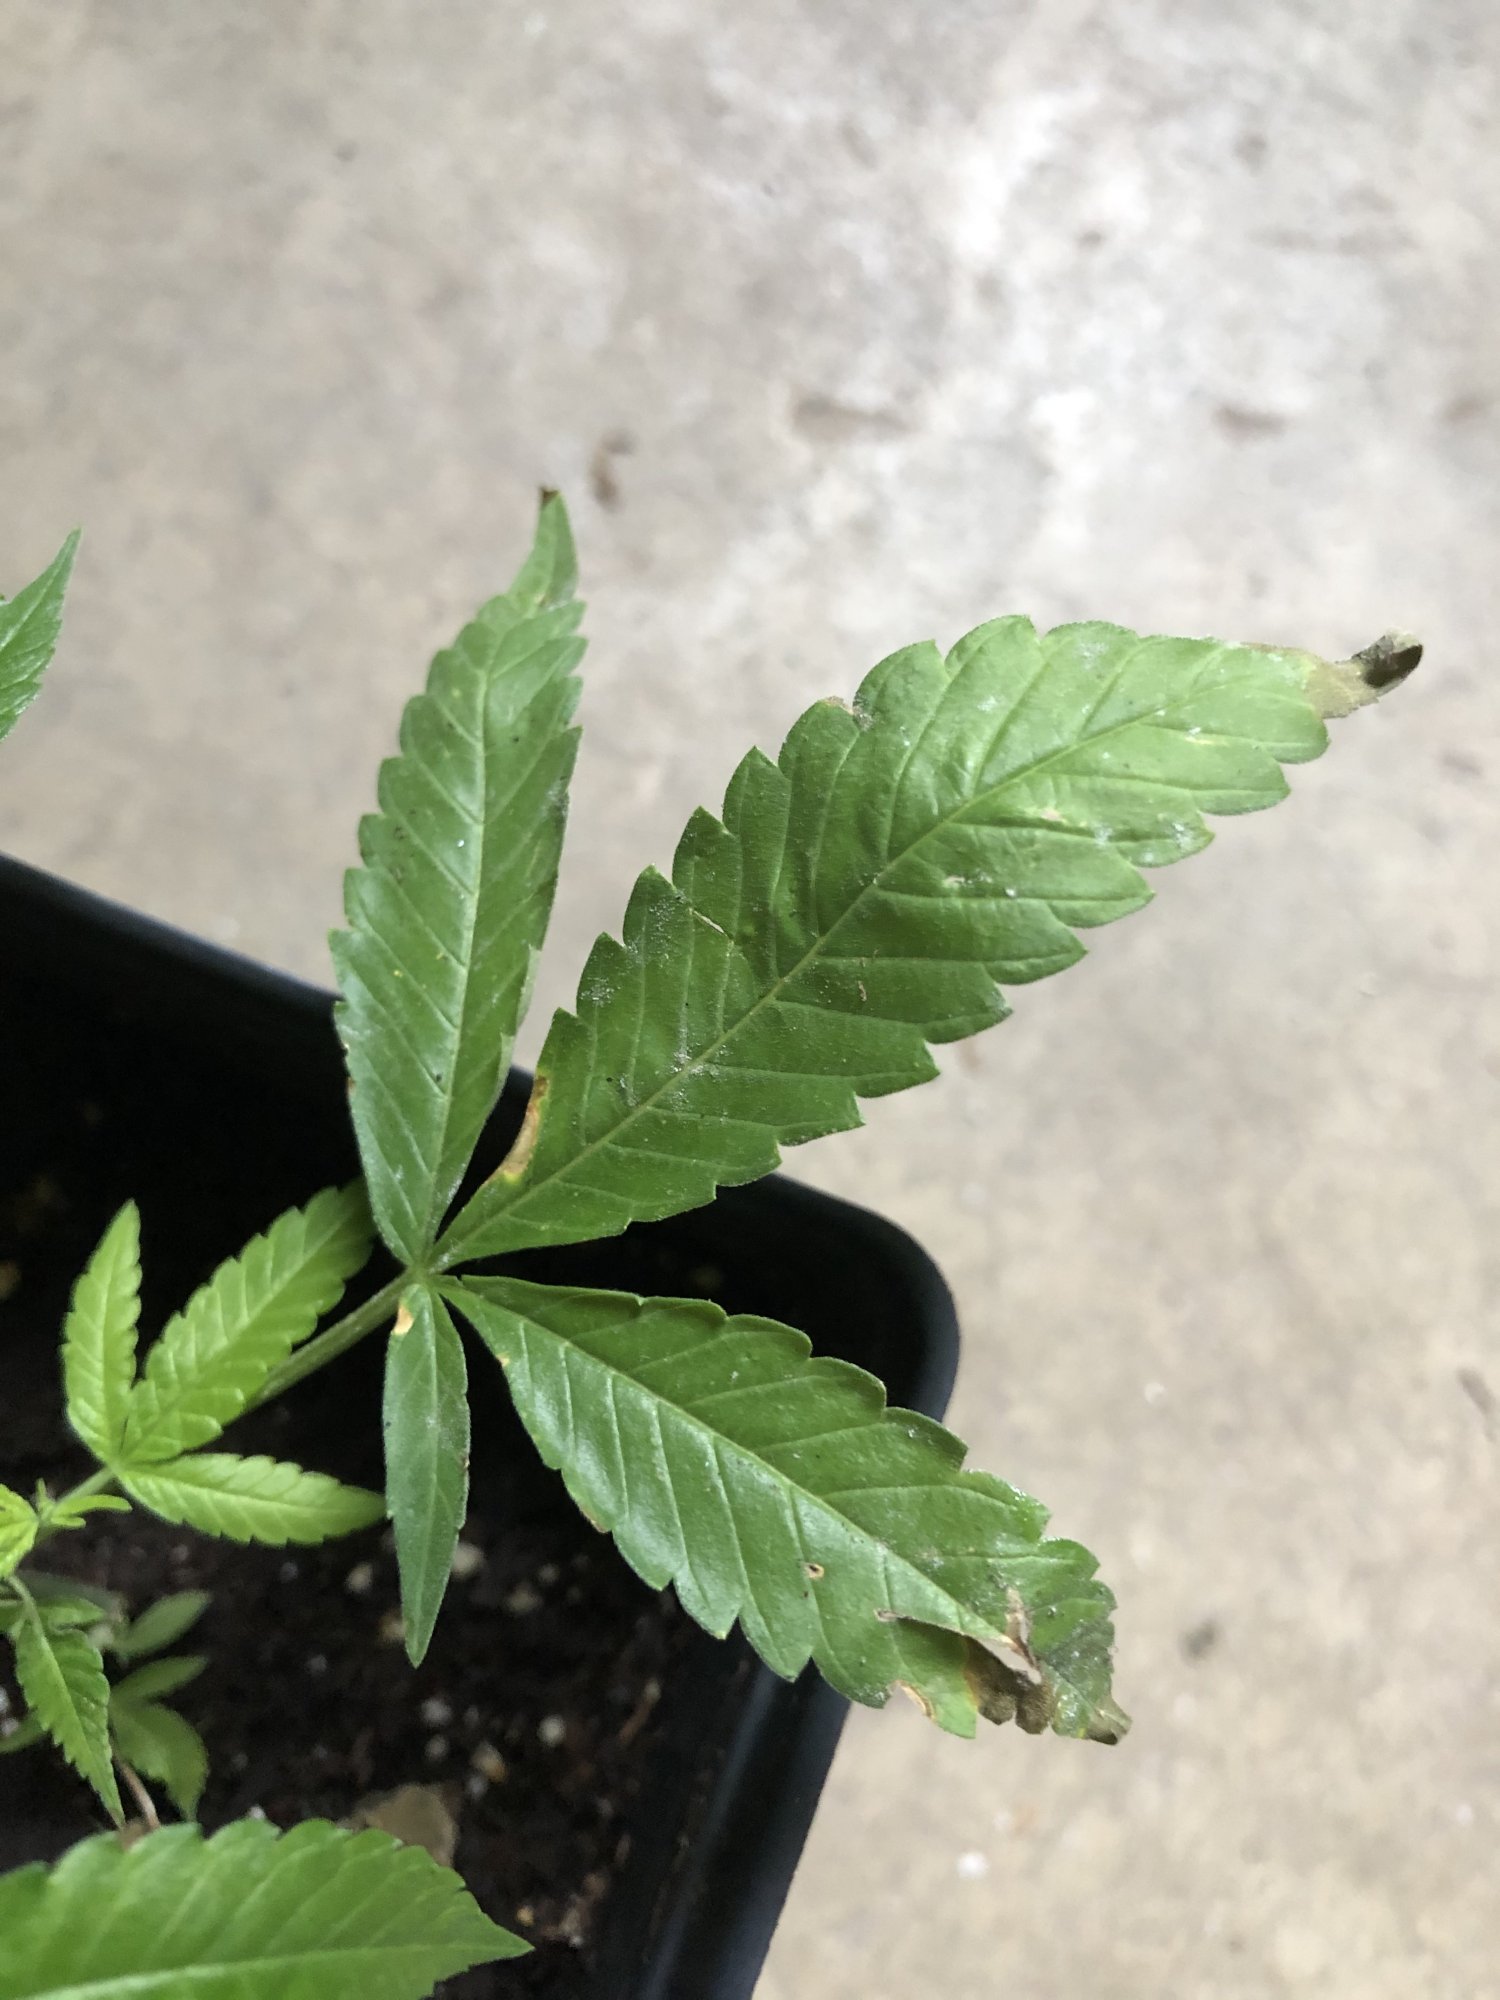 Got clones from a friend contorted stems and is this wpm please help